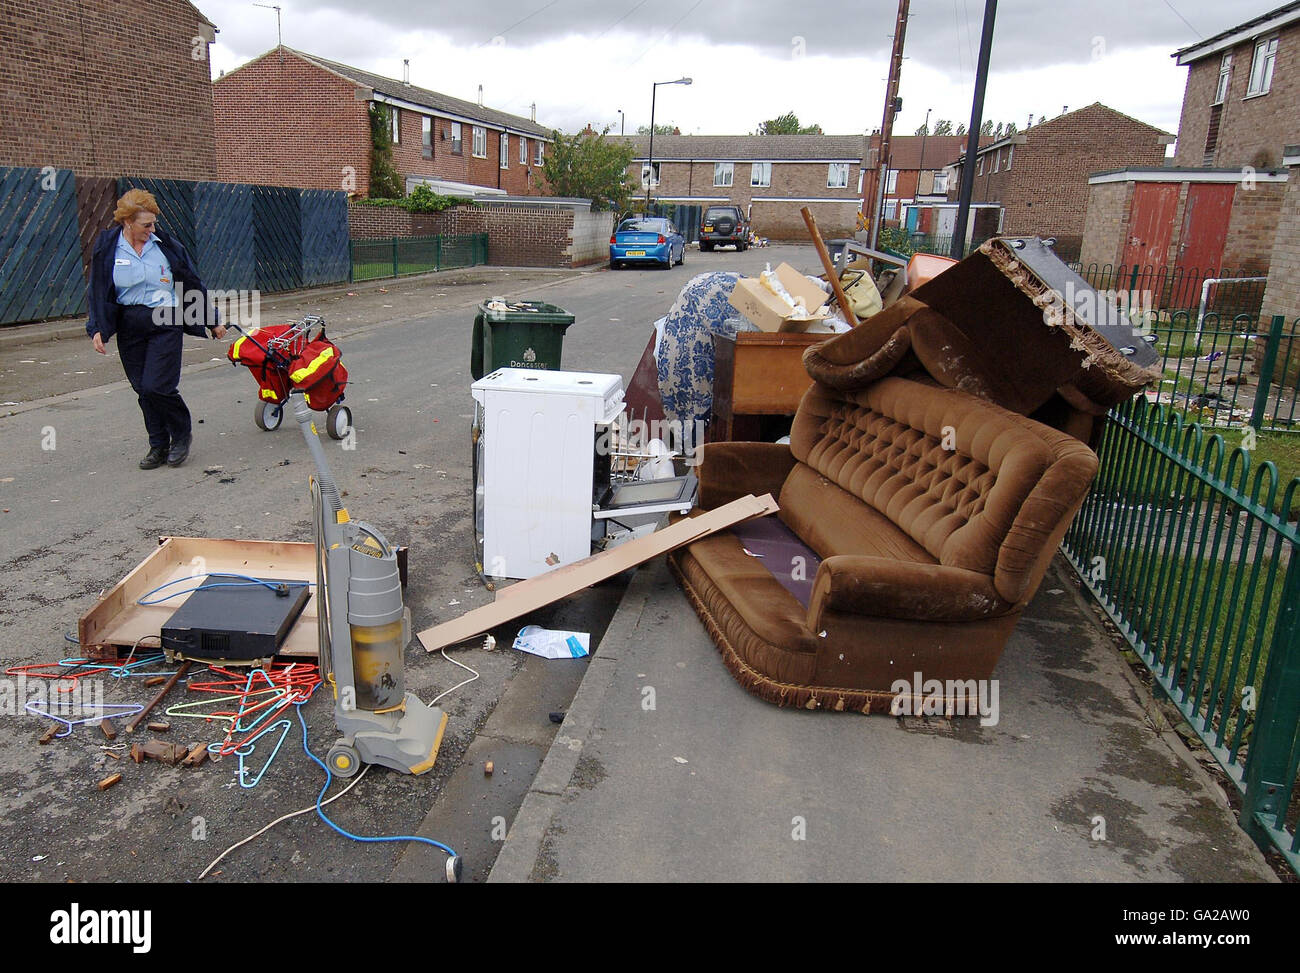 A postal worker walks past ruined possessions in Toll Bar, near Doncaster, which was hit by heavy flooding. Stock Photo